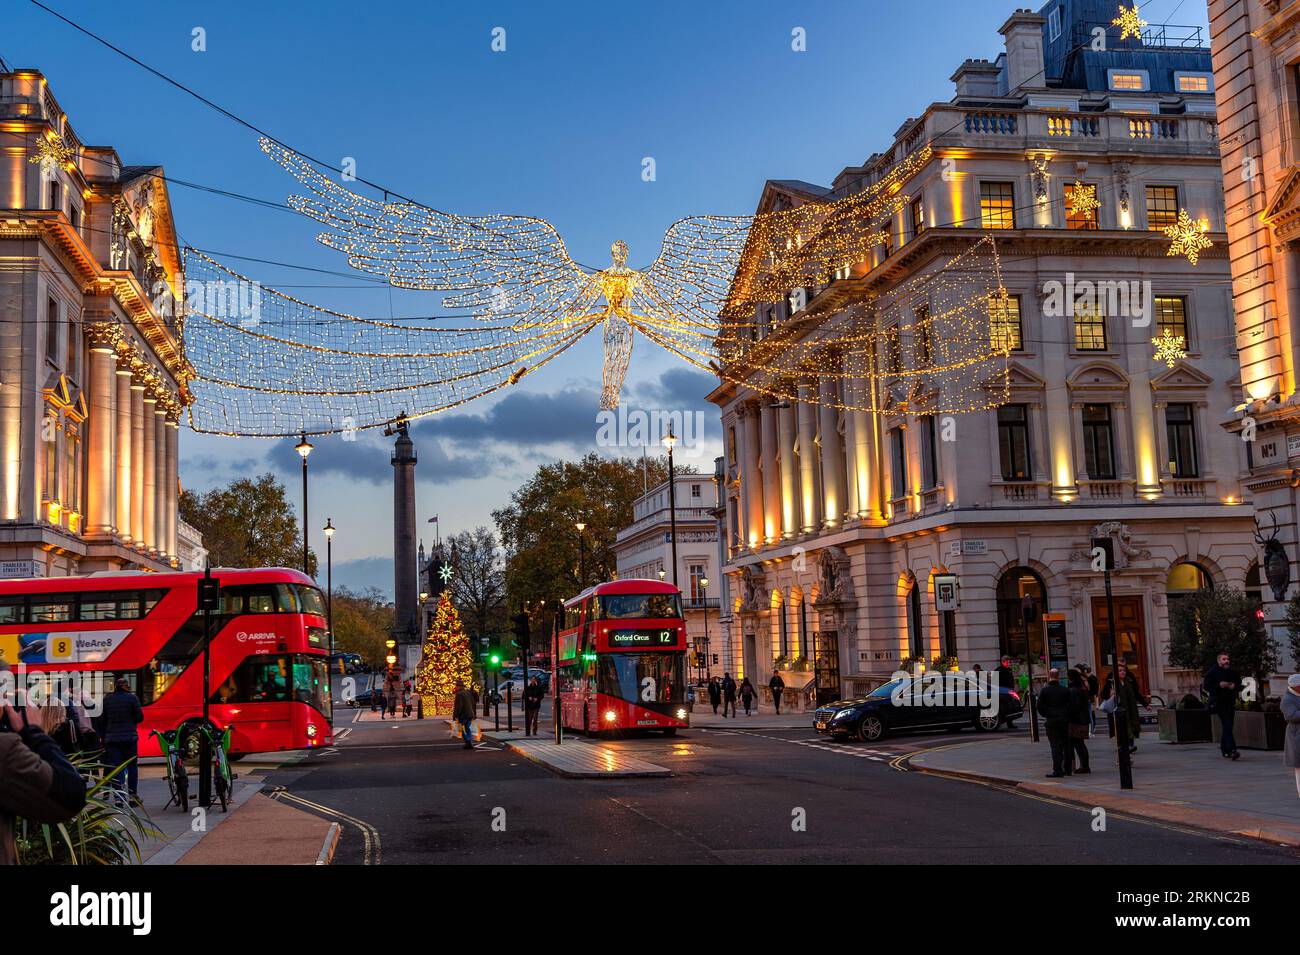 London, England, Uk - November 23, 2022: Street view in London at dusk, illustrating the city life in the Christmas holiday period with angel lights d Stock Photo